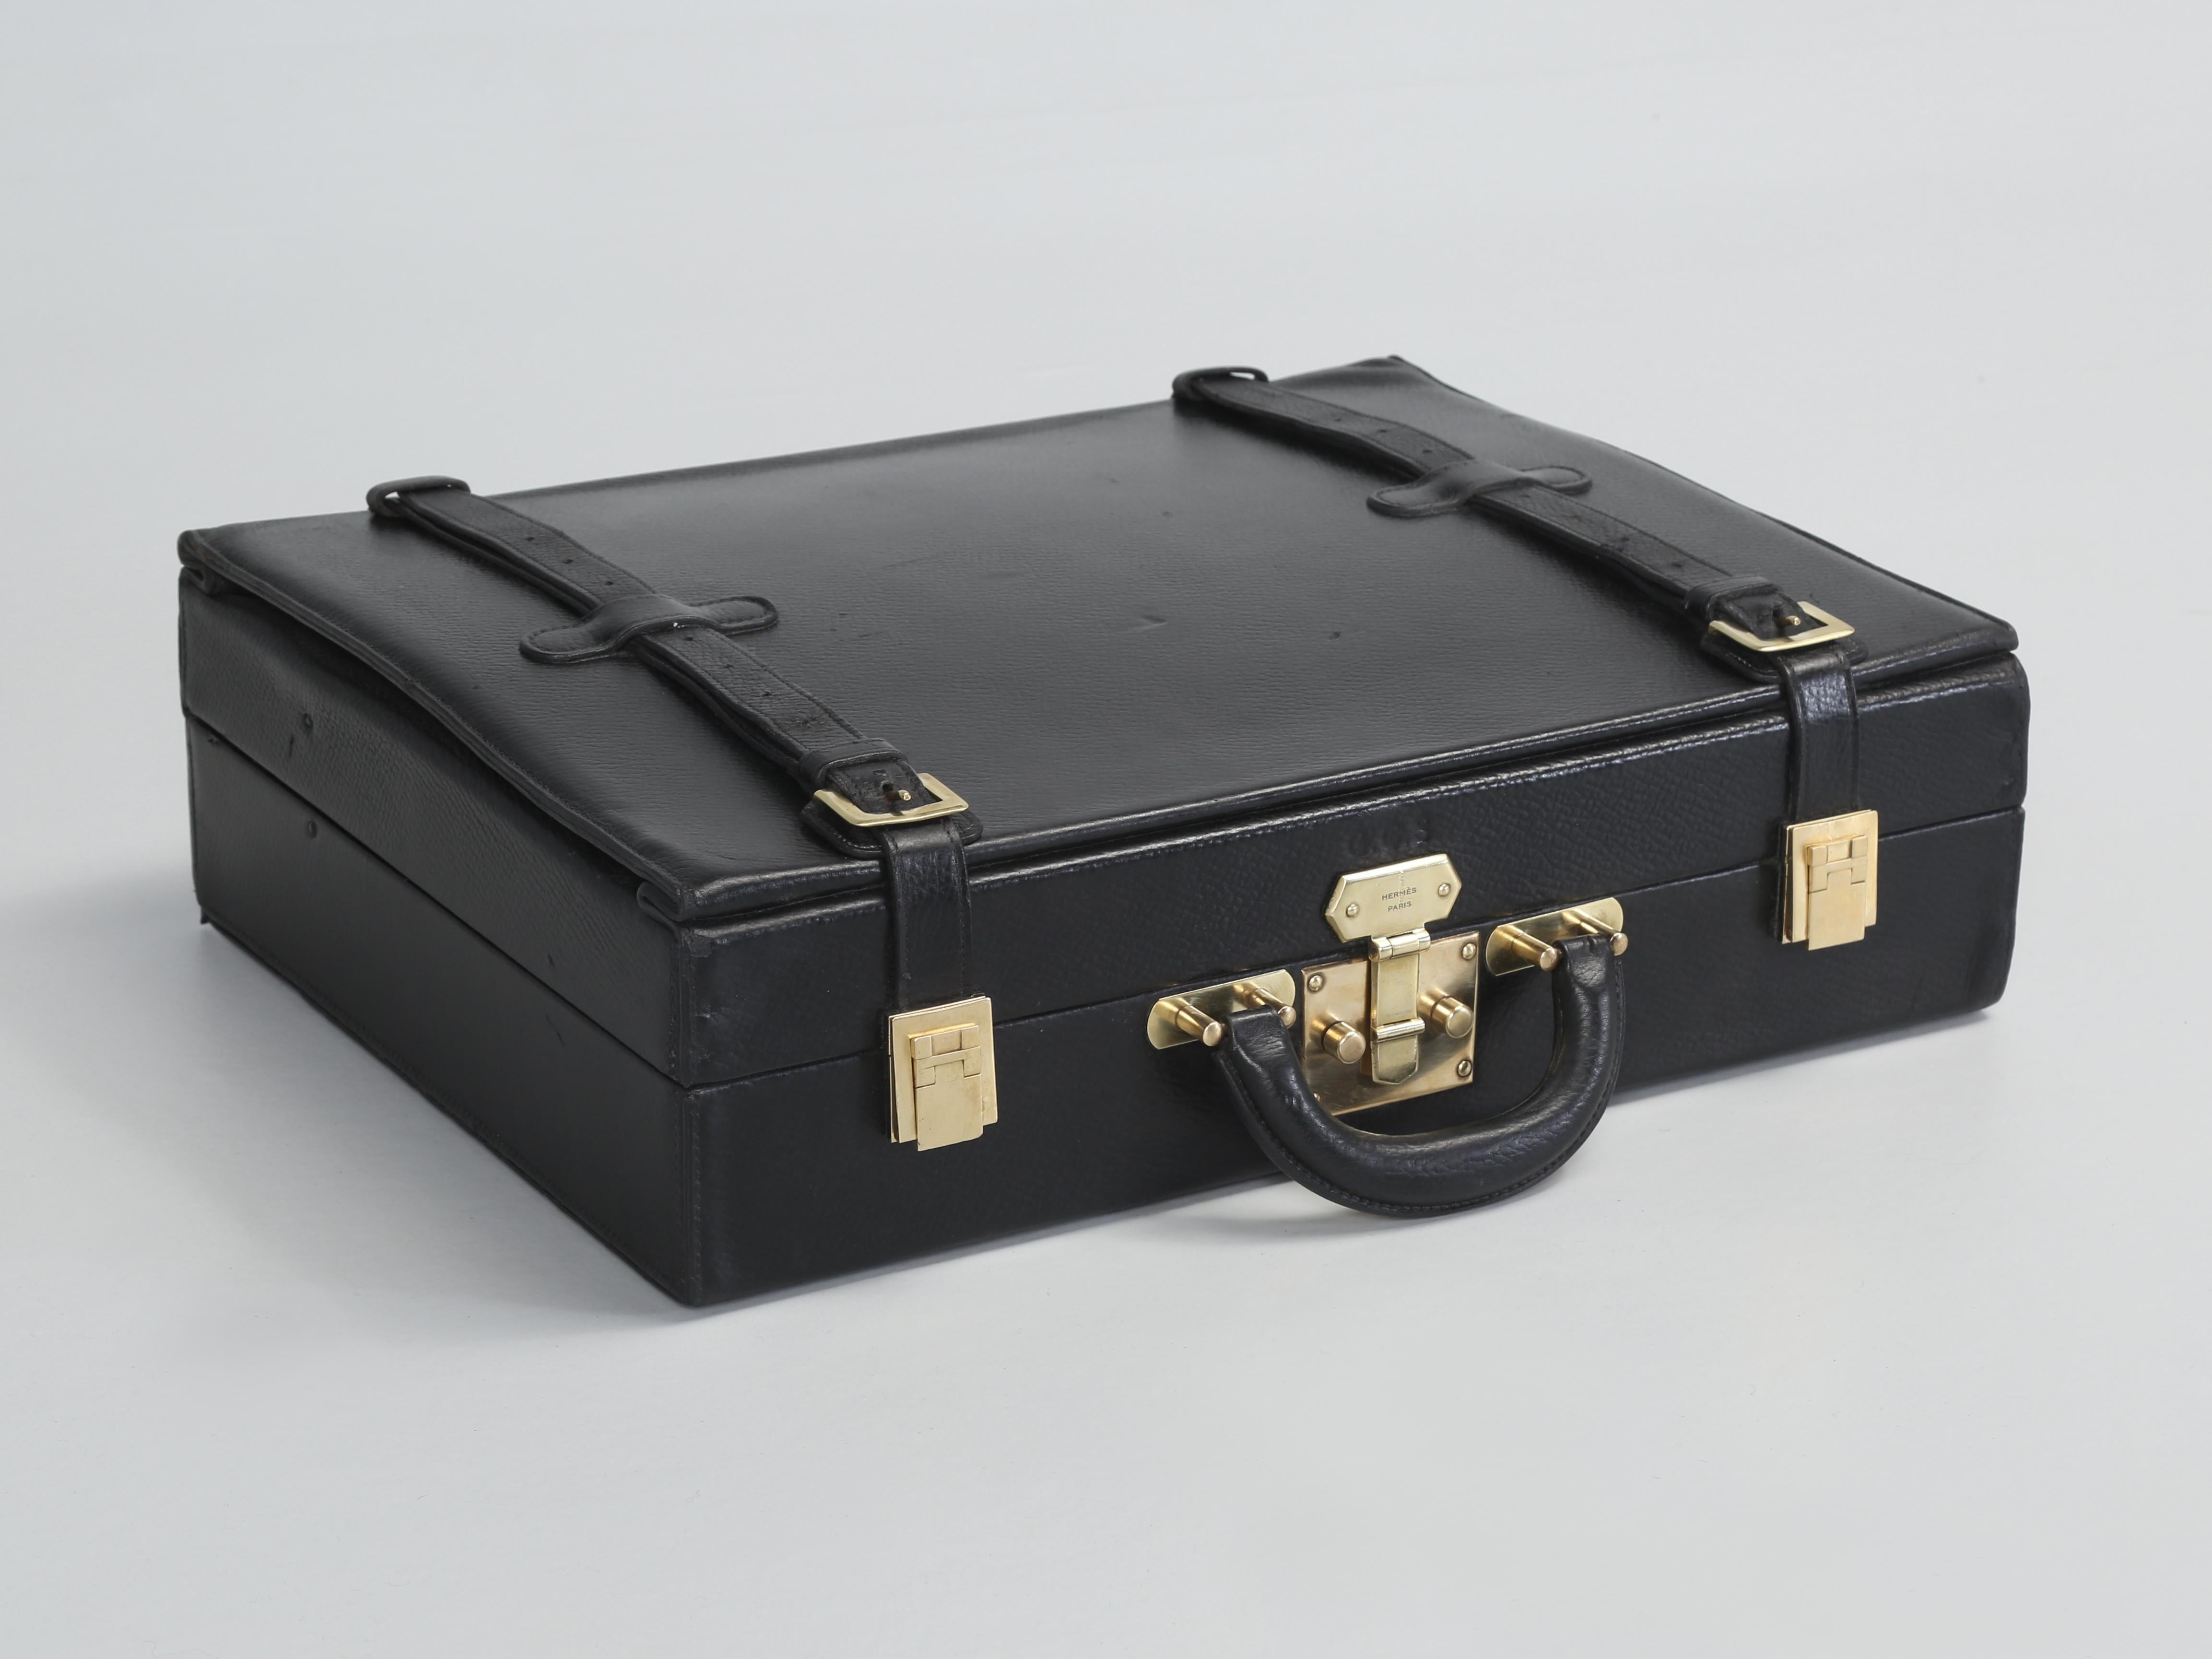 Hermès Vintage Leather Briefcase that expands with the assistance of a Pair of Leather Straps. We tried very hard to research this incredible Hermès Black Leather Briefcase with the Leather Straps, however, we could not find another one after